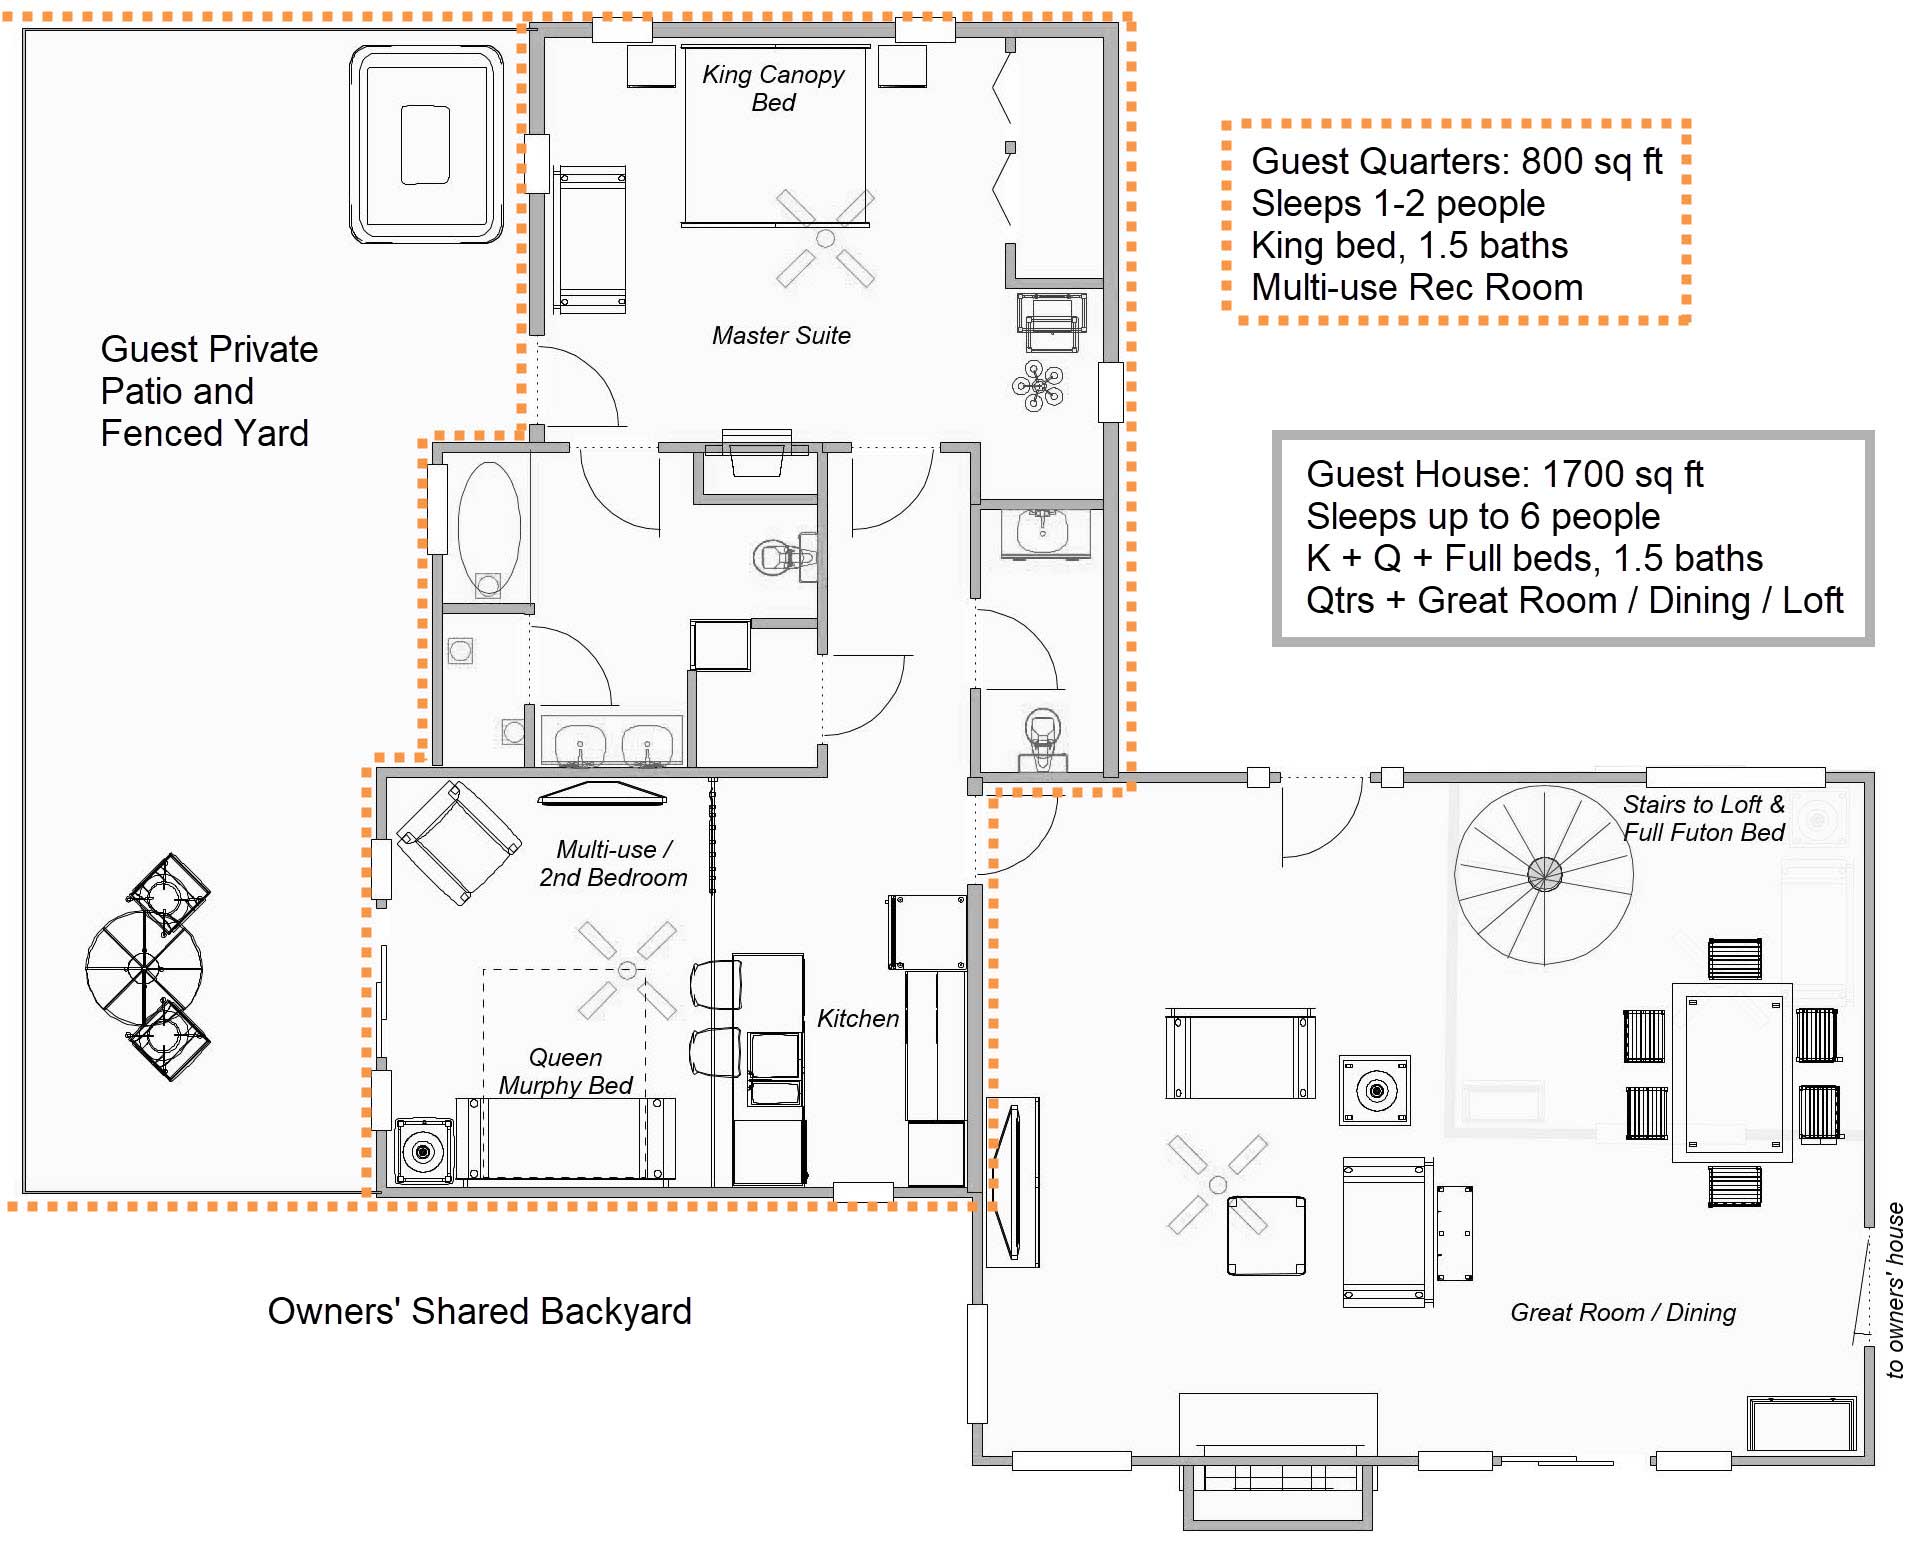 Guest house layout of rooms and furniture